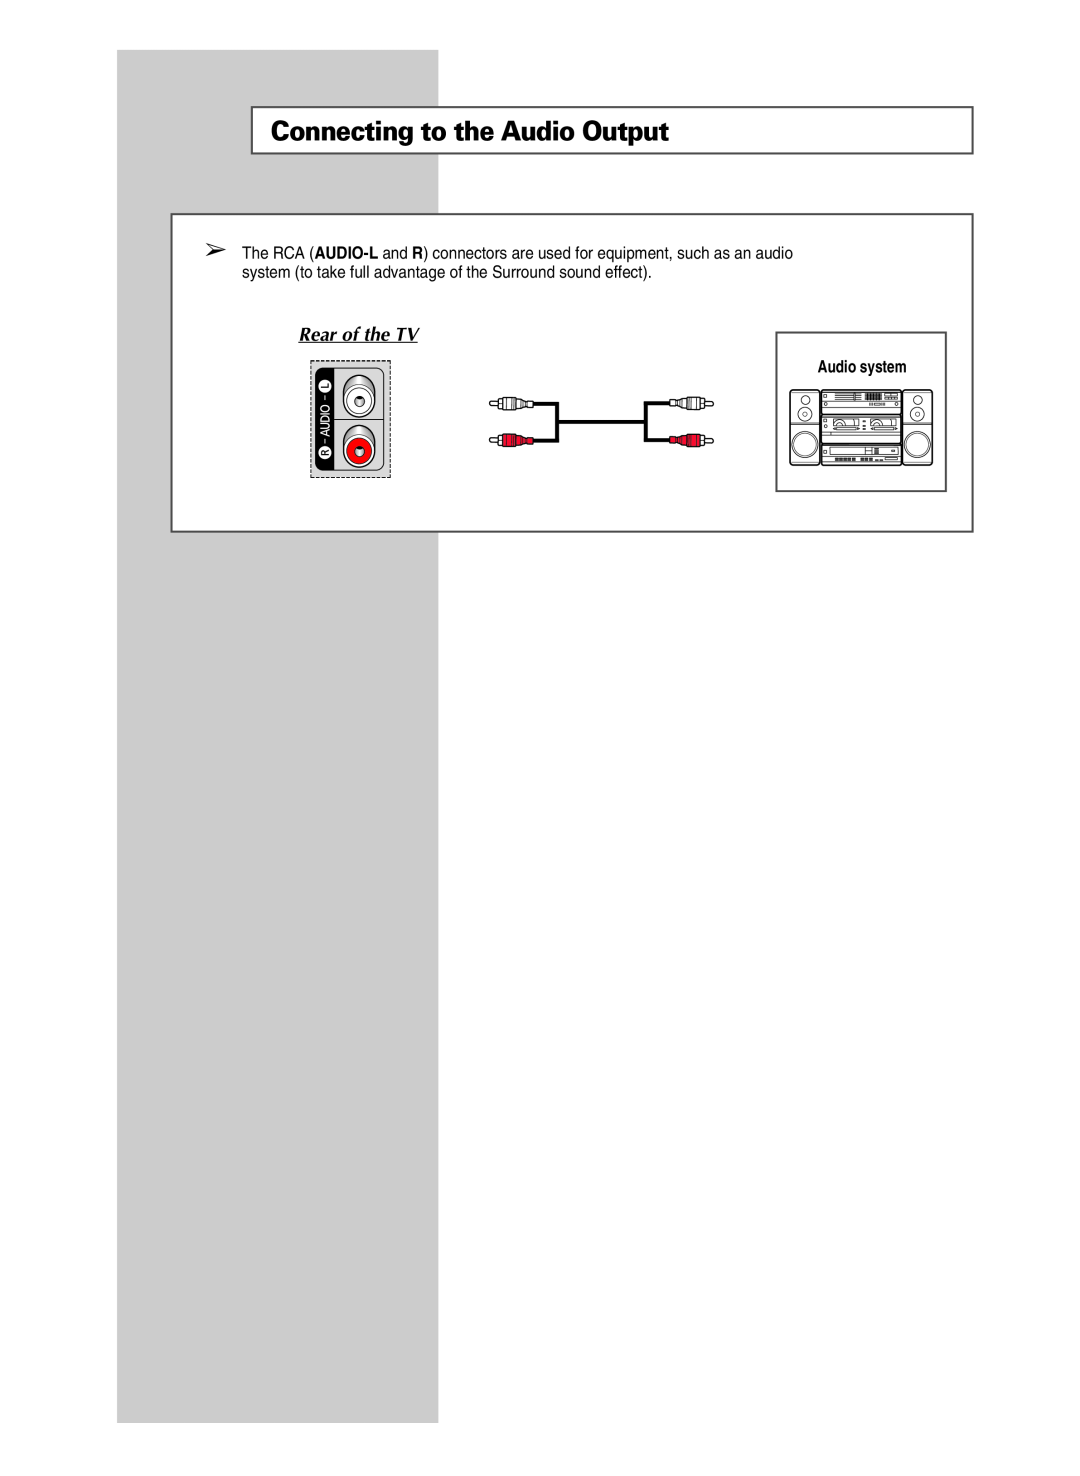 Samsung SP-43R1HL manual Connecting to the Audio Output, Rear of the TV, Audio system 